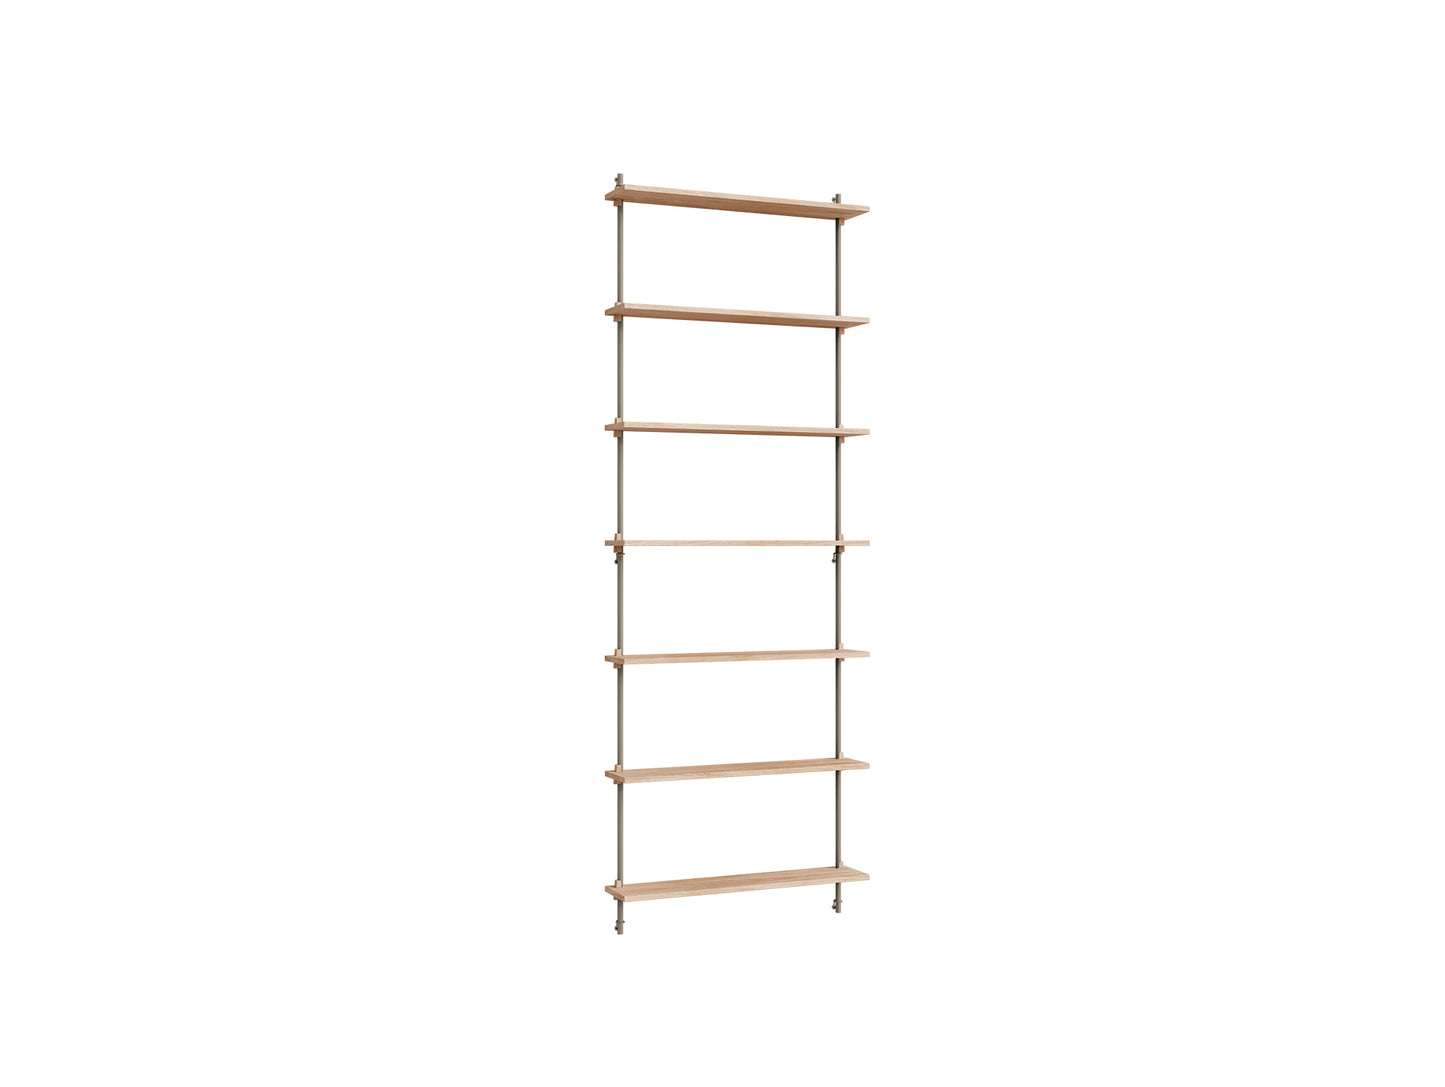 Wall Shelving System Sets (230 cm) by Moebe - WS.230.1 / Warm Grey Uprights / Oiled Oak